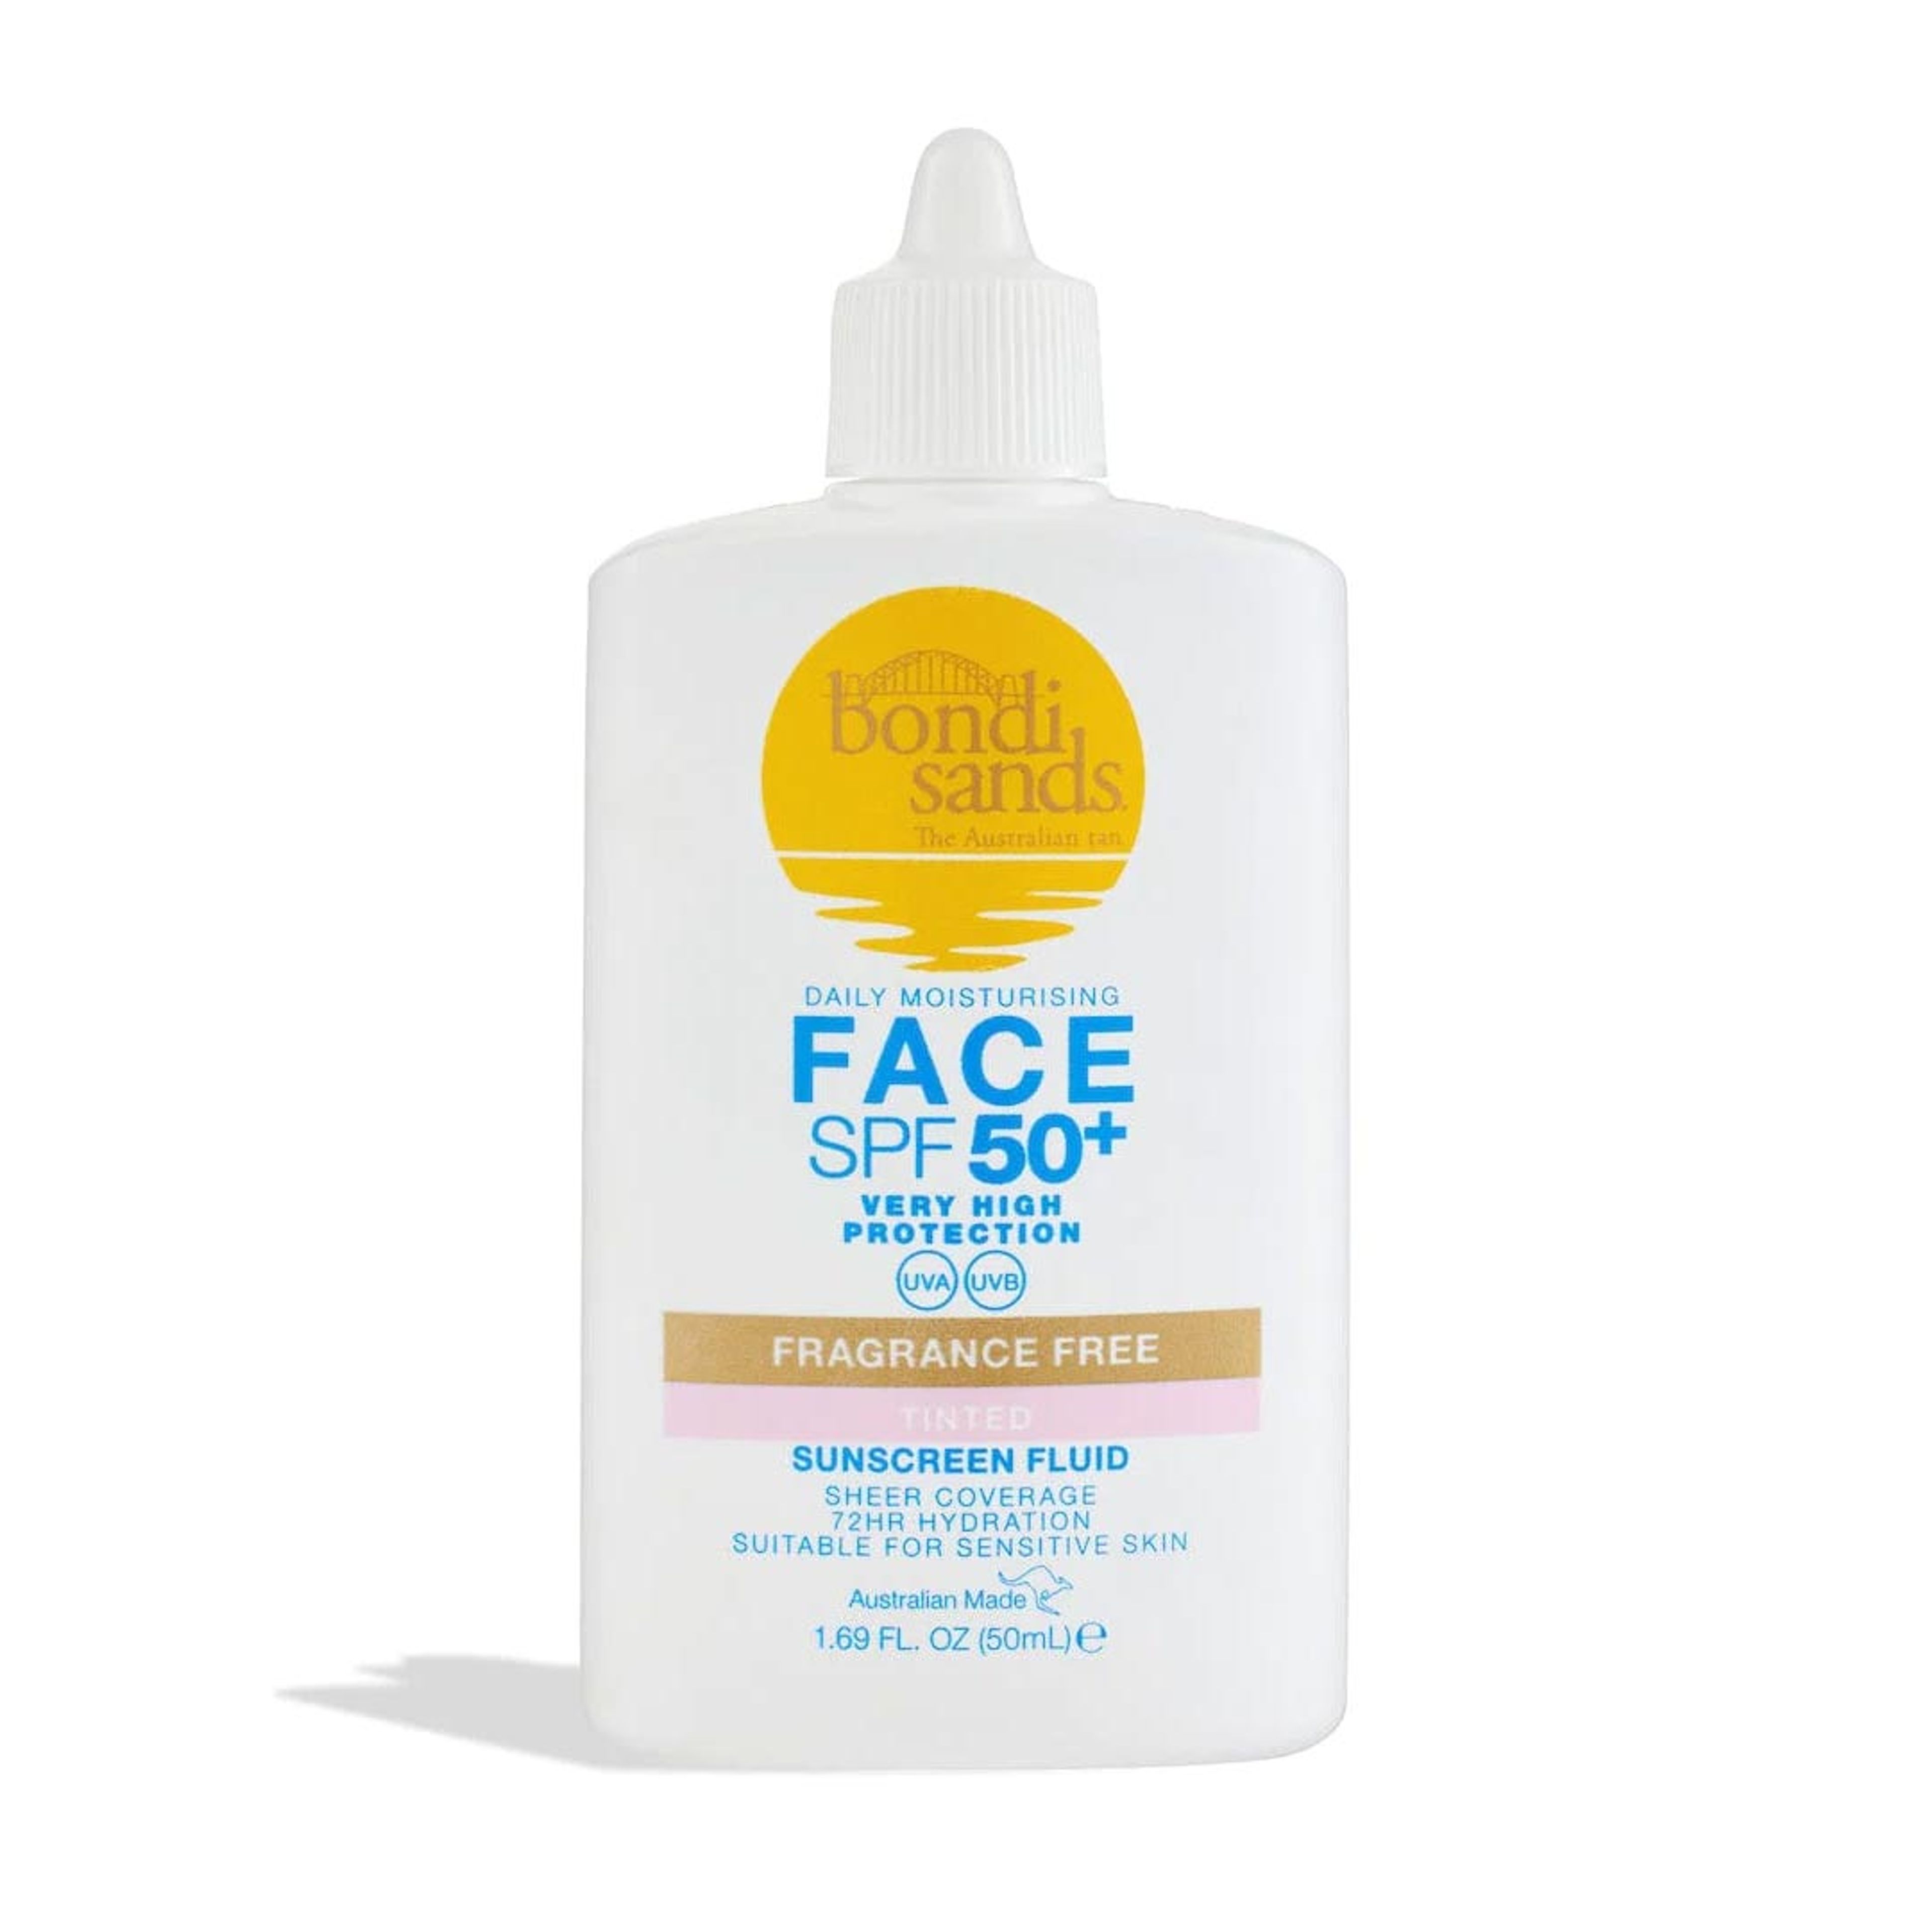 SPF 50+ Fragrance Free Tinted Face Fluid